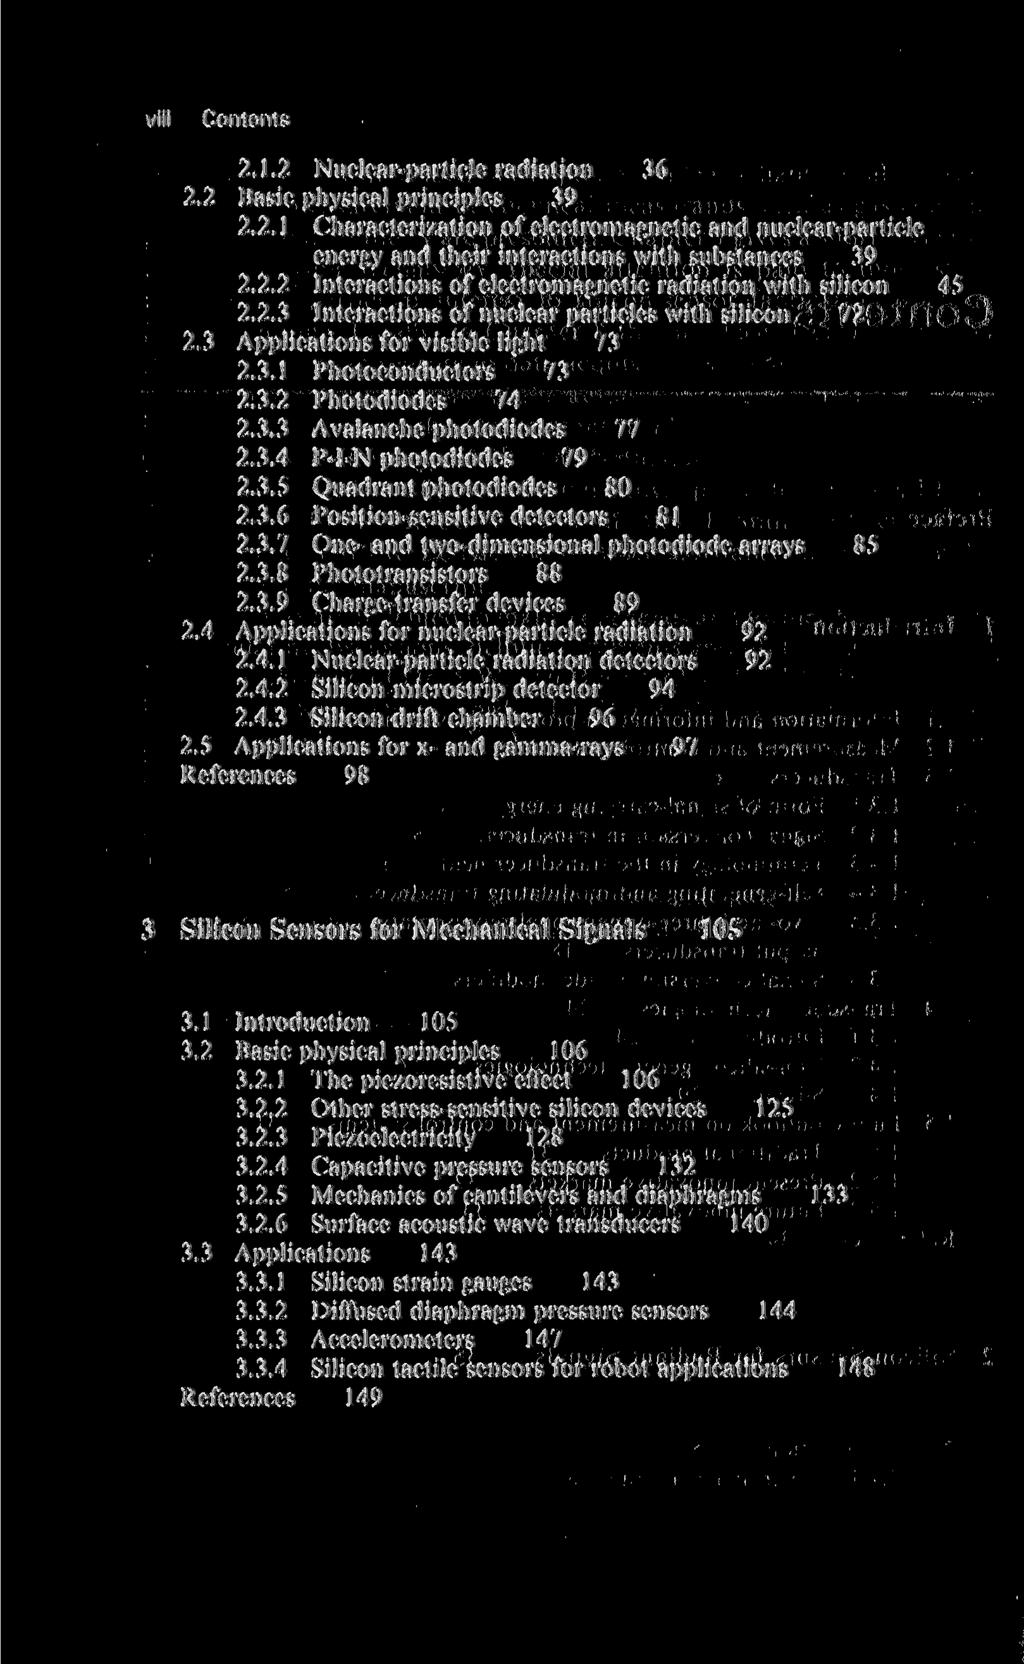 viii Contents 2.1.2 Nuclear-particle radiation 36 2.2 Basic physical principles 39 2.2.1 Characterization of electromagnetic and nuclear-particle energy and their interactions with substances 39 2.2.2 Interactions of electromagnetic radiation with silicon 45 2.